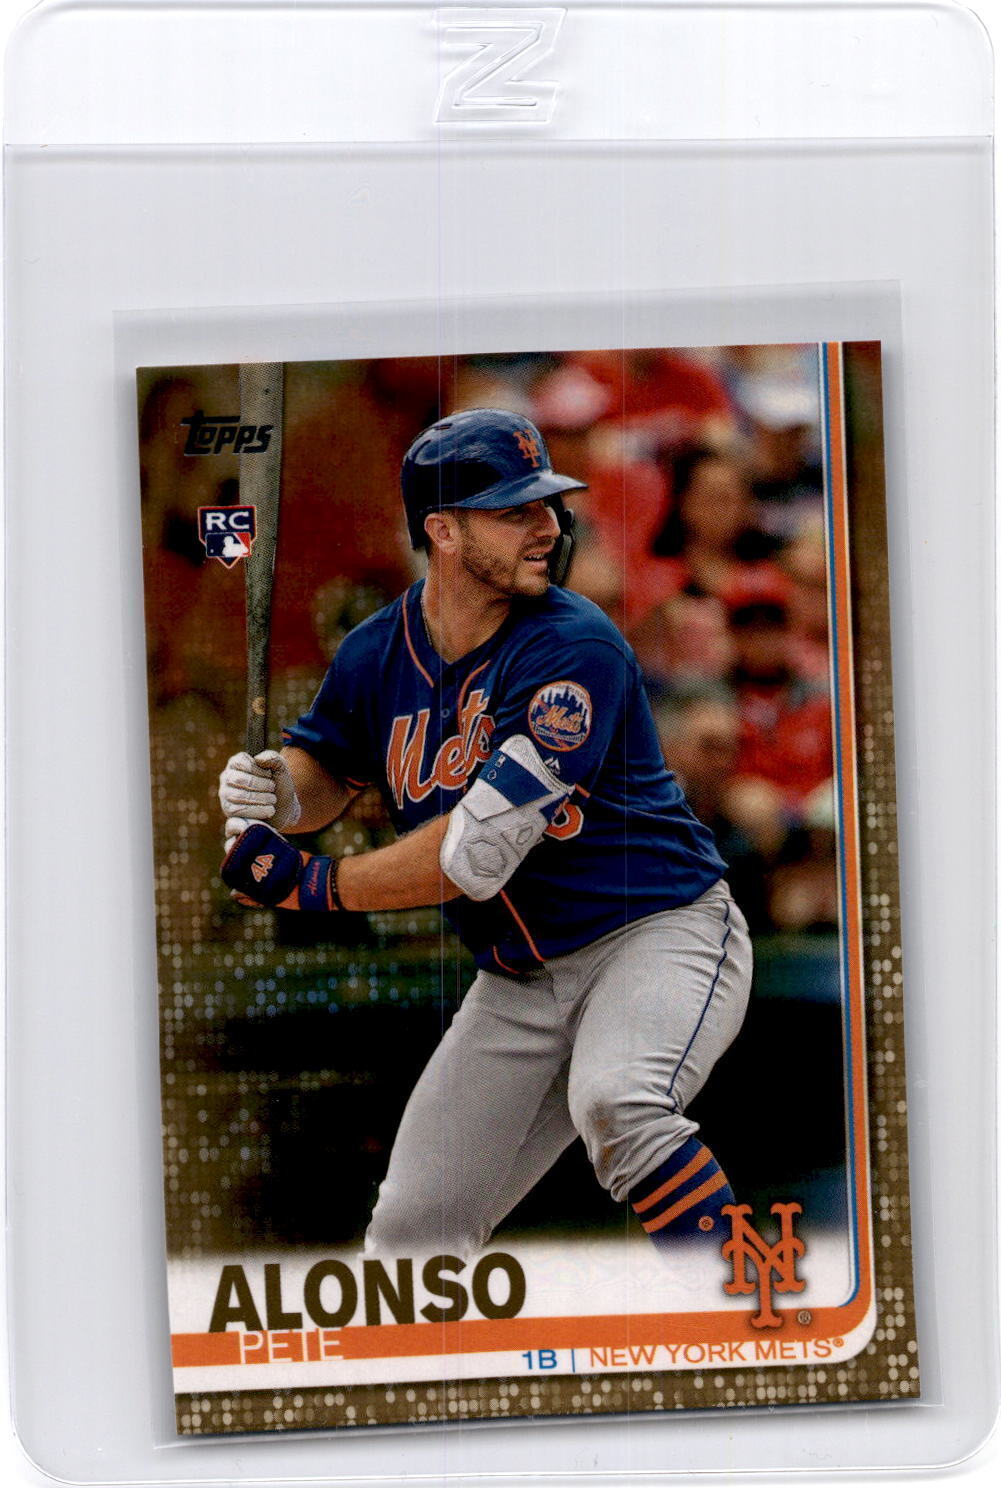 2019 Topps #475 Pete Alonso Gold #/2019